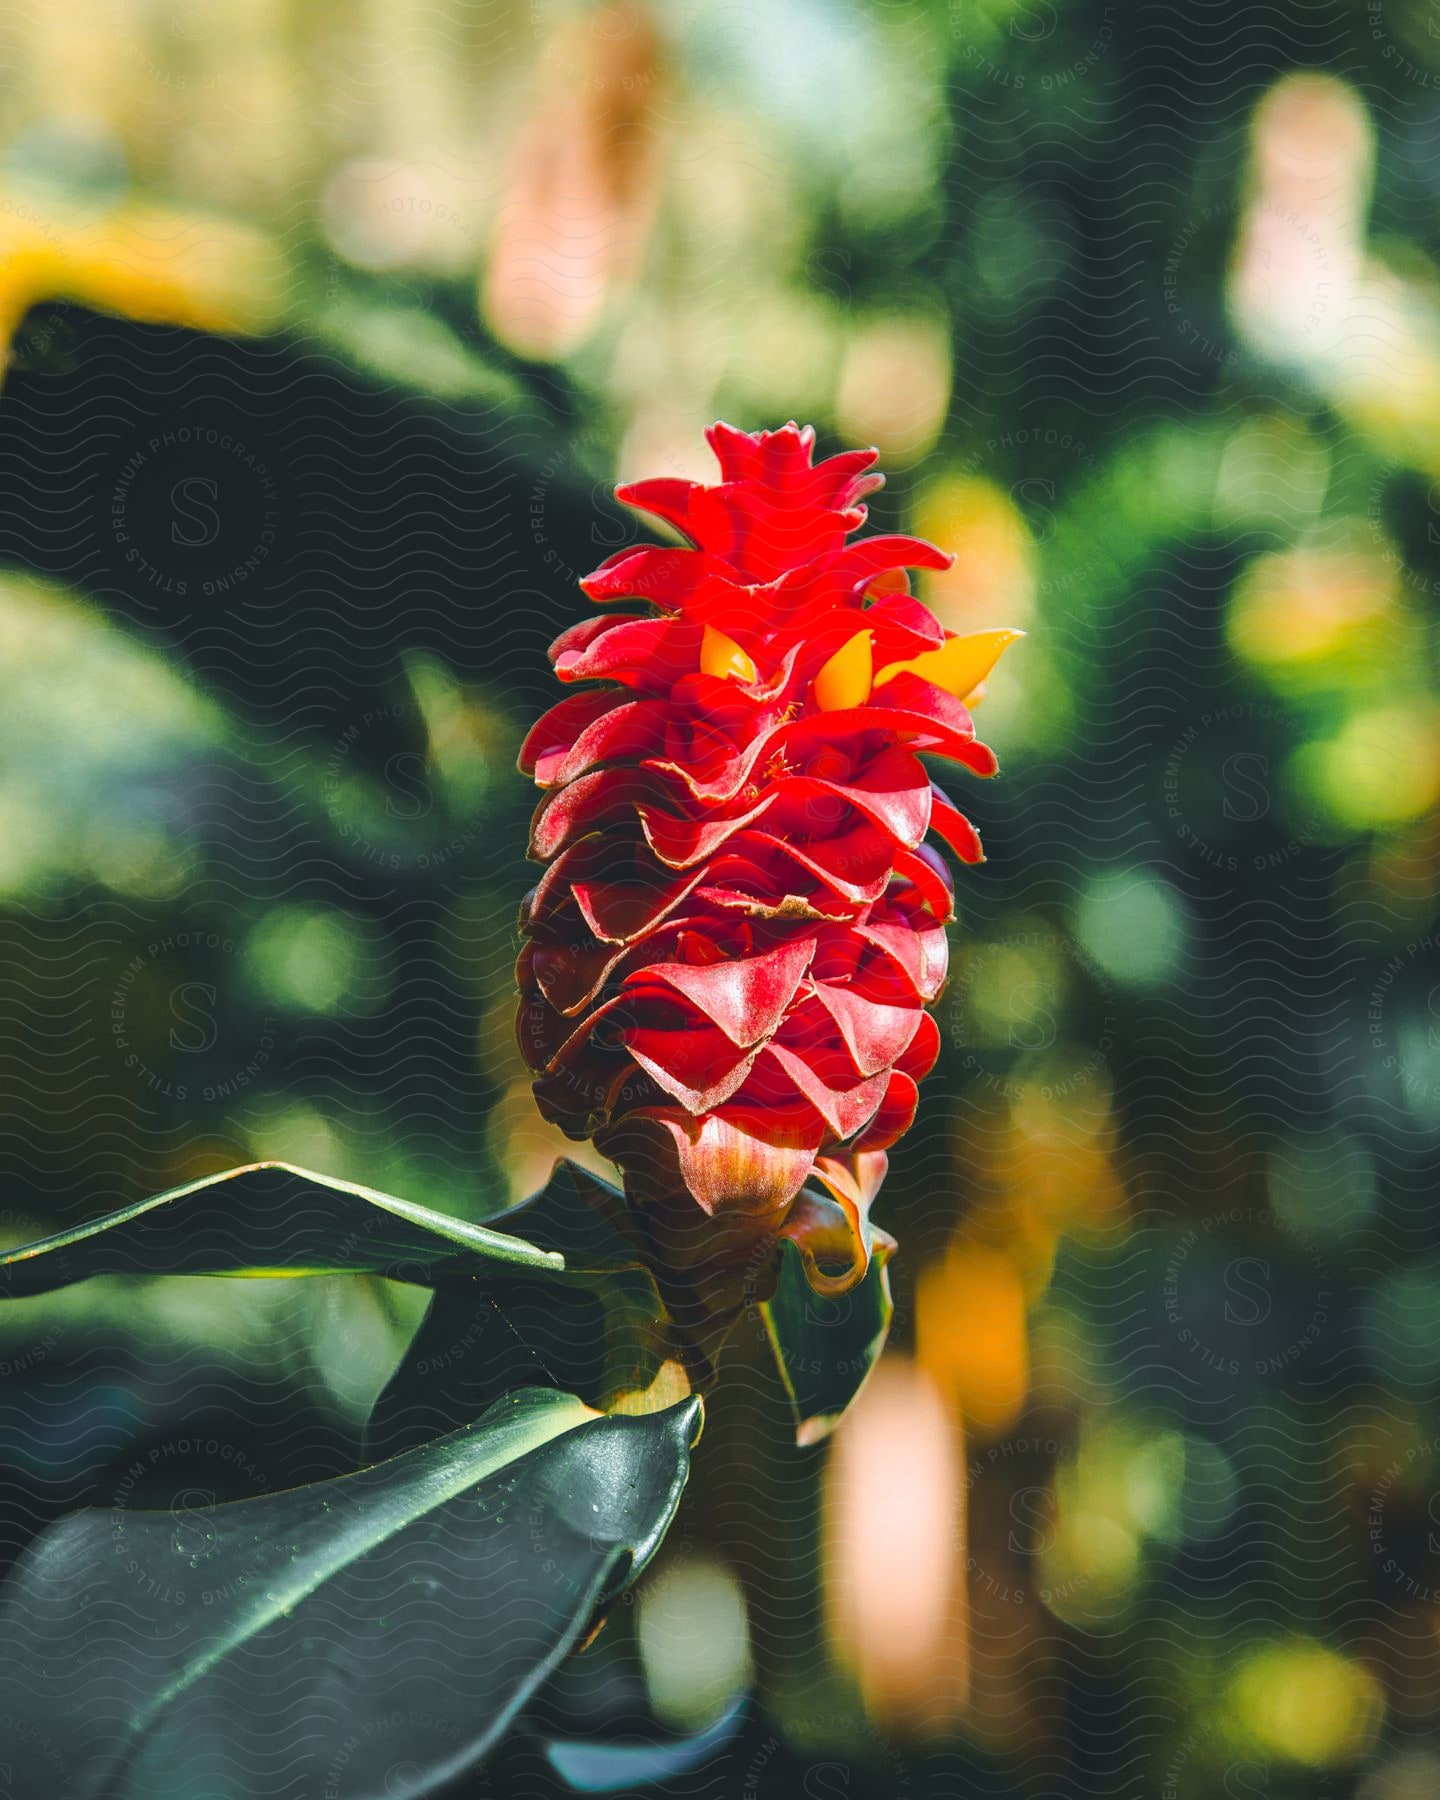 Close-up of a red tropical flower blooming.